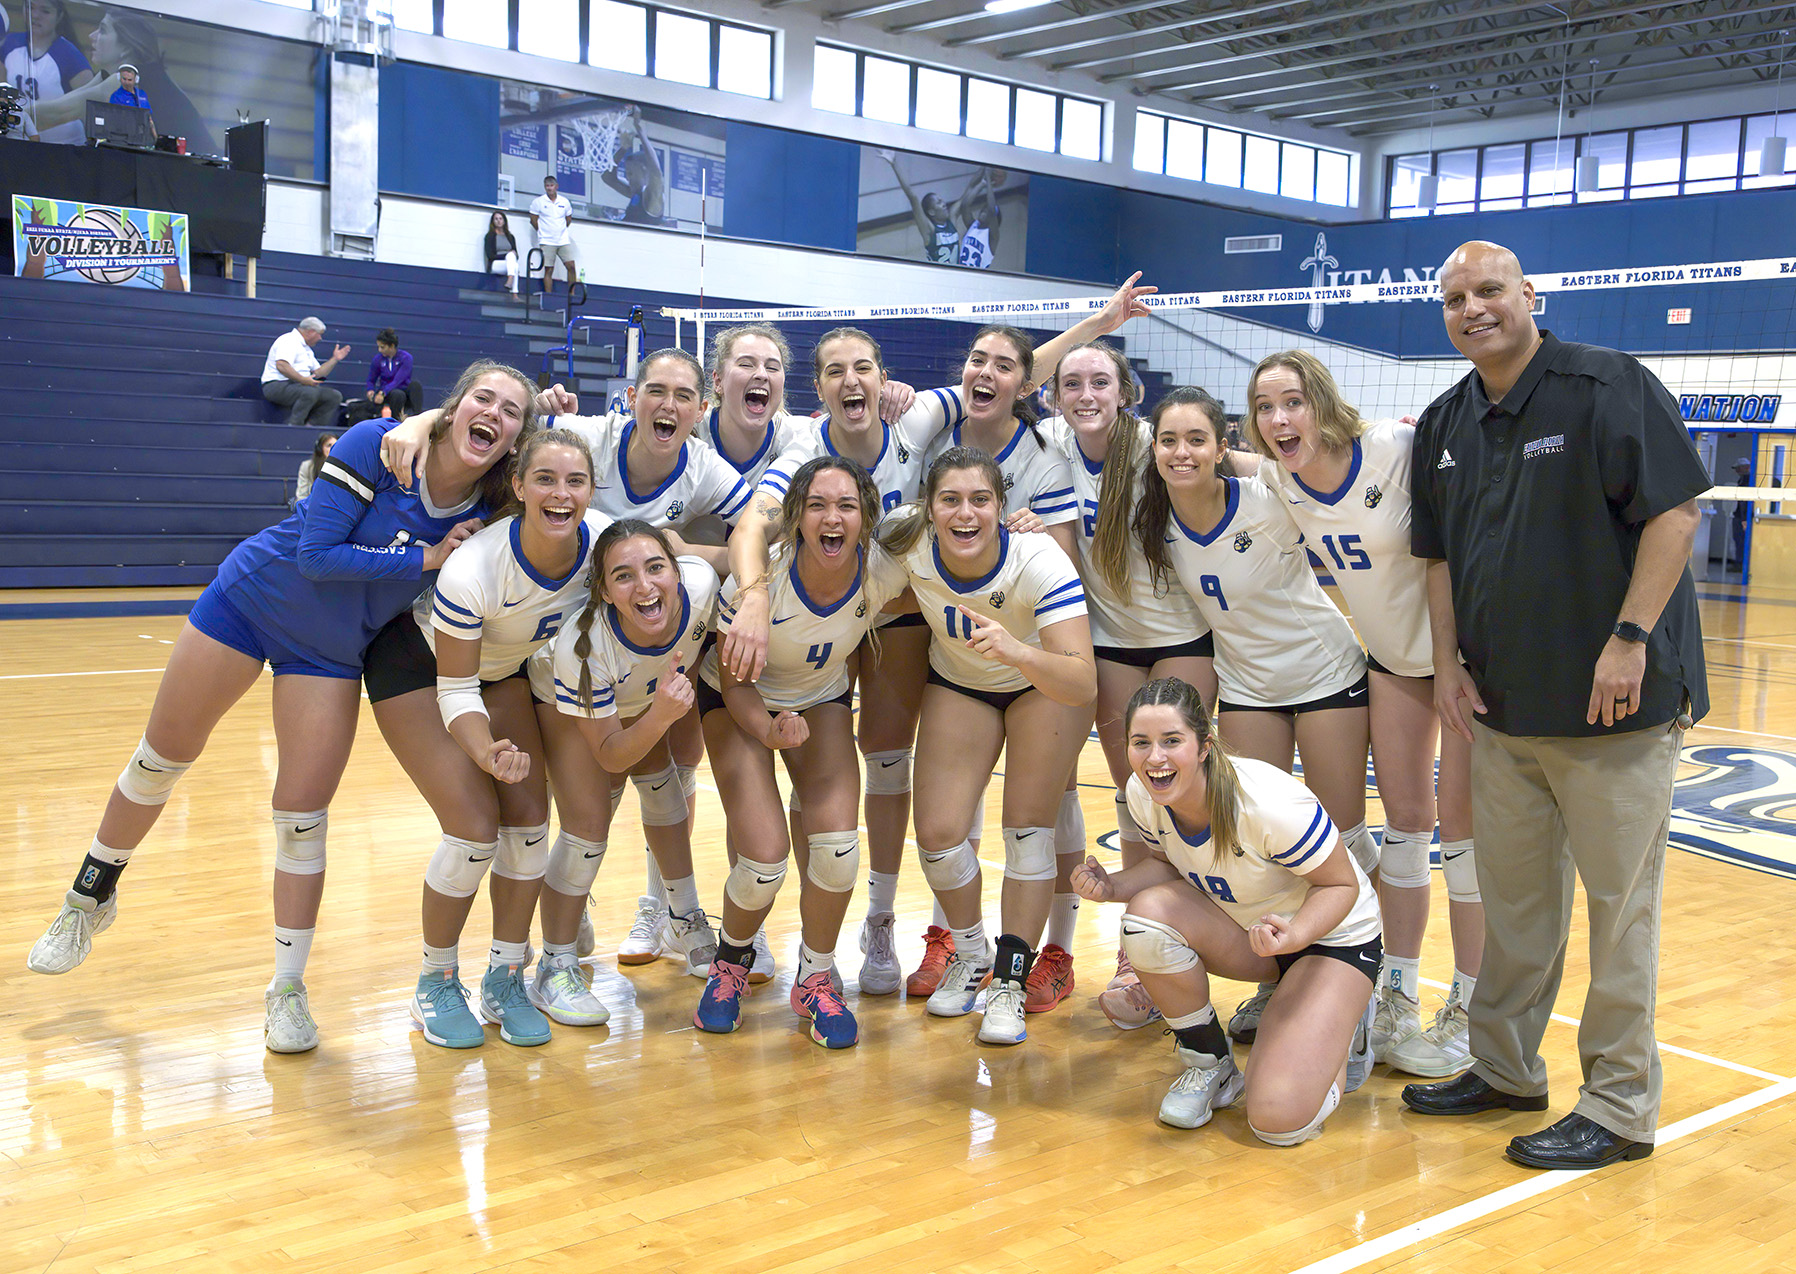 Women's volleyball team to play Polk State for third at state tournament